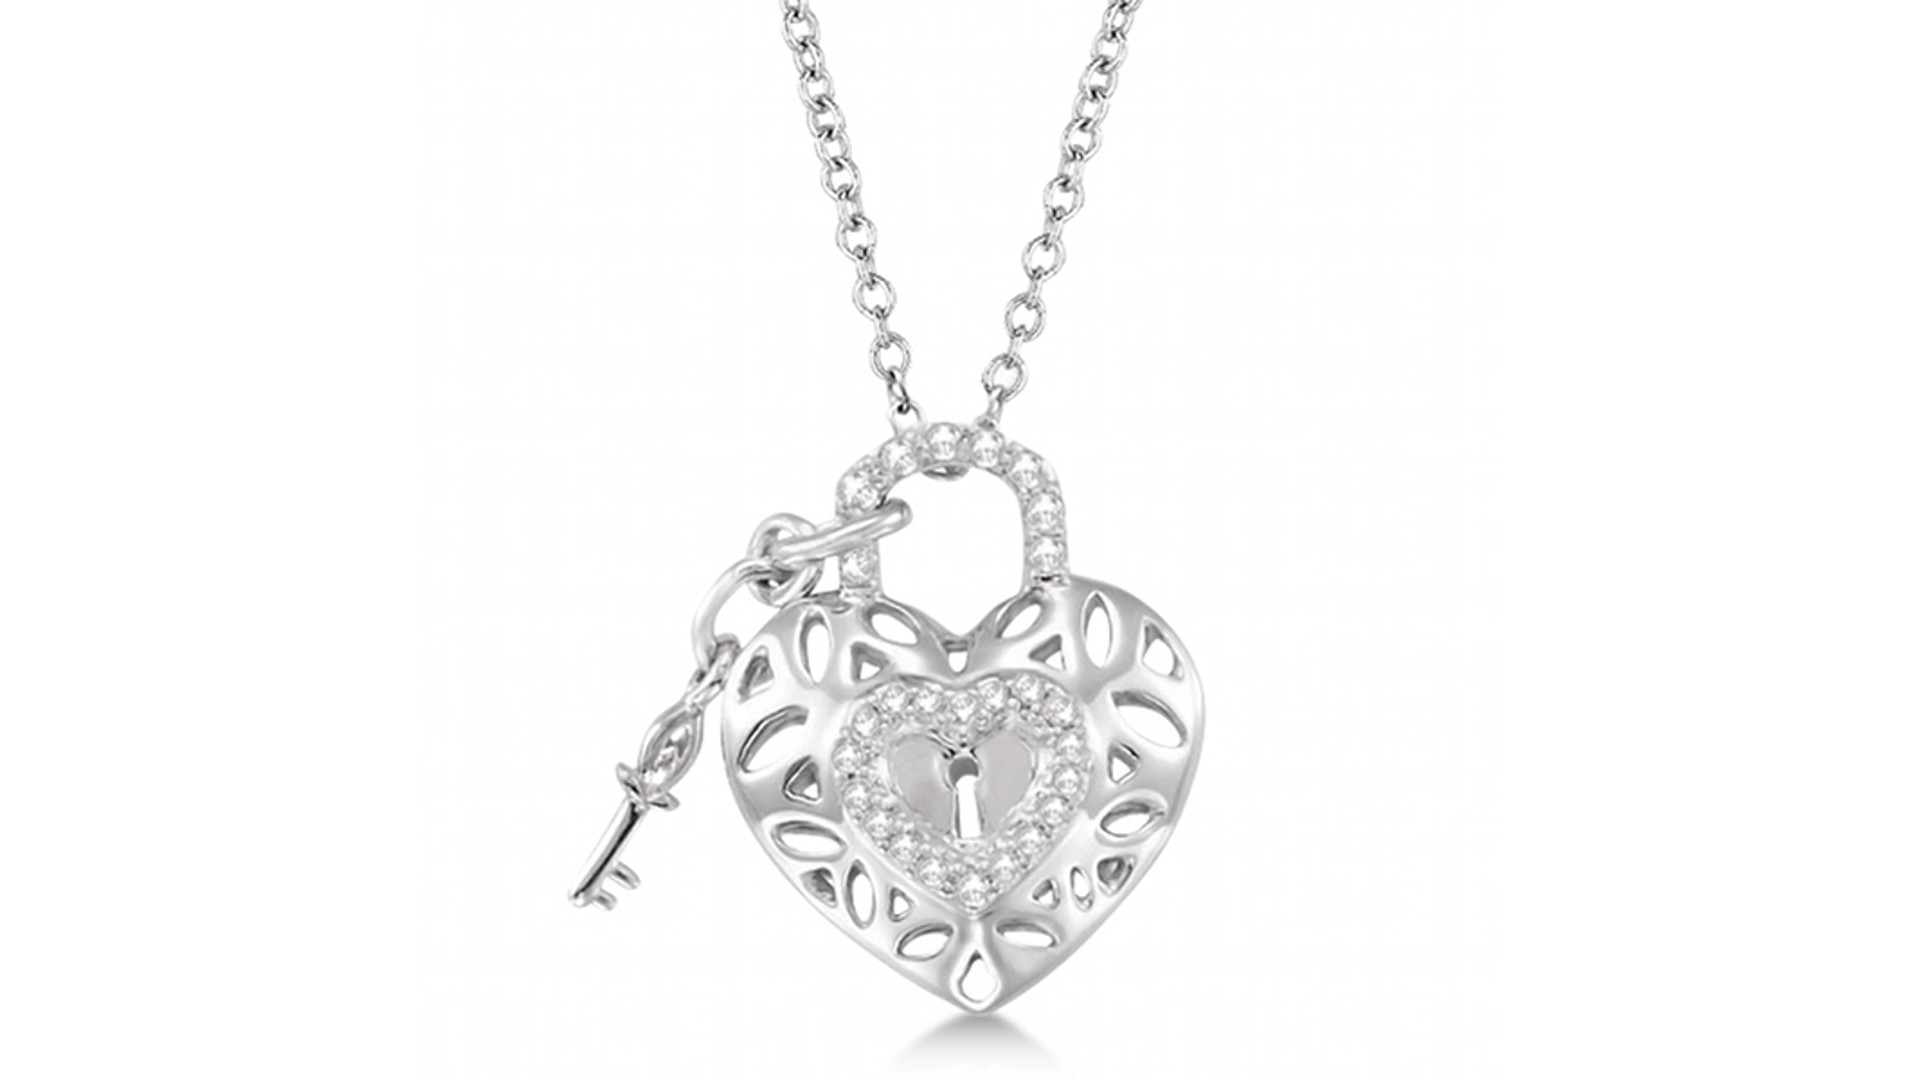 Valentine’s Day Gift Guide: a Diamond Heart Key and Lock Pendant